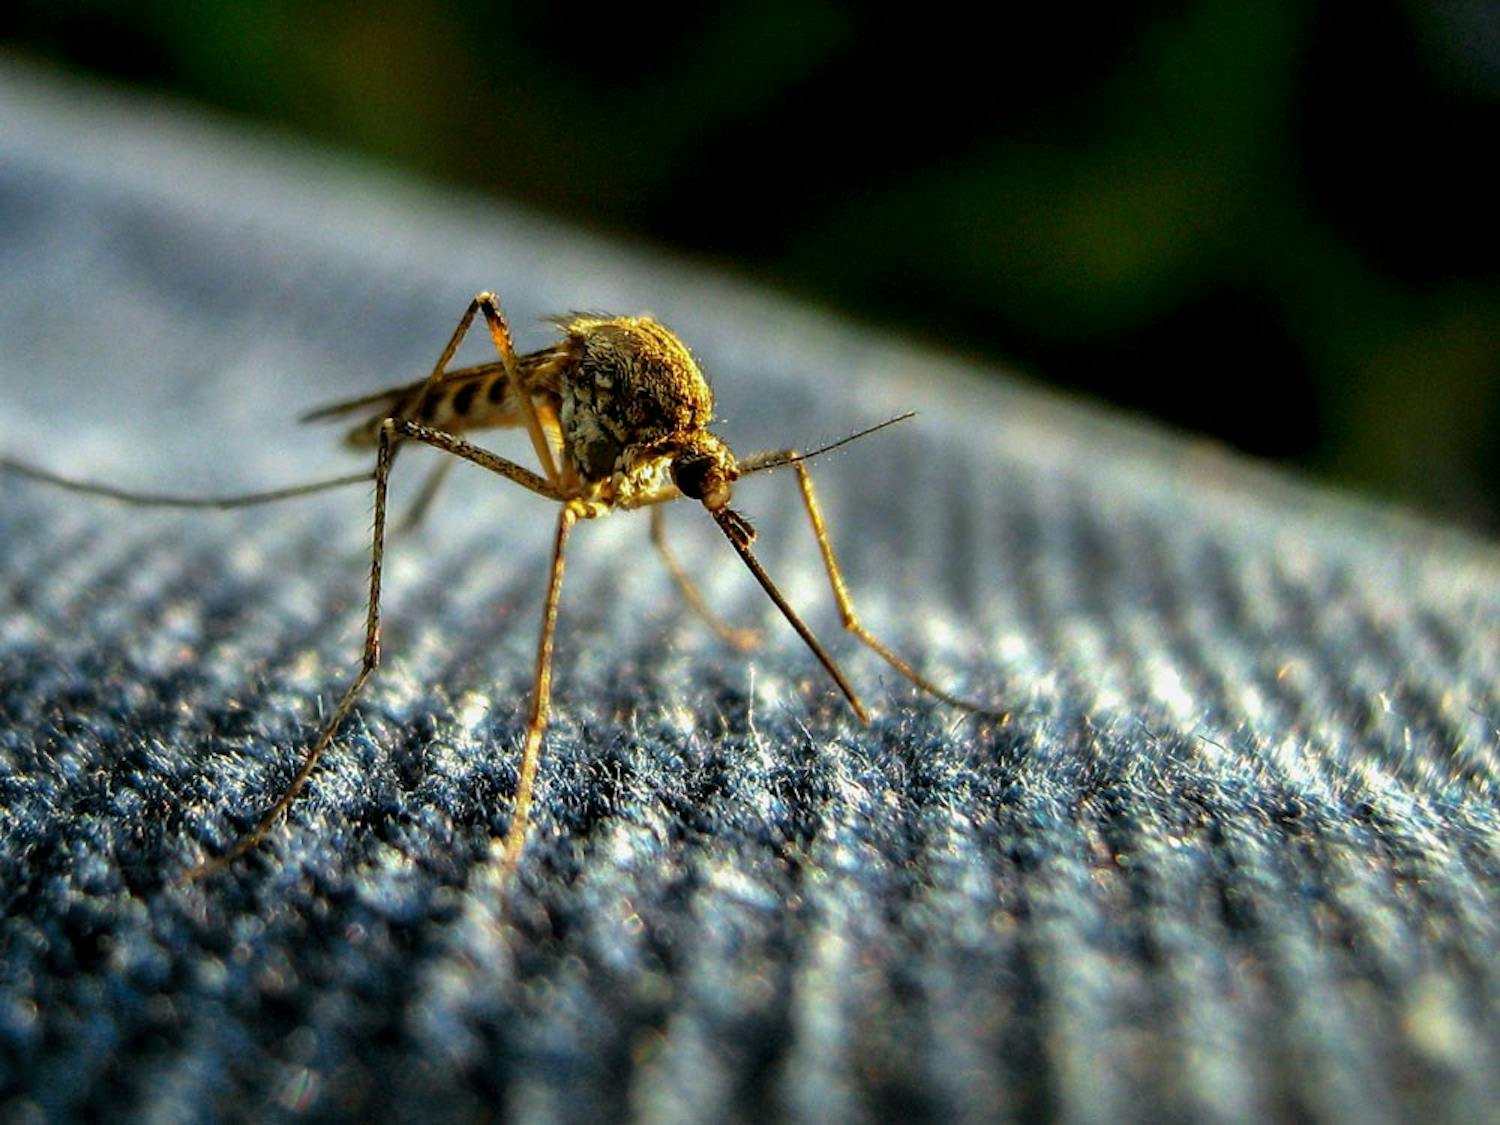 The Zika virus is a major threat to any person living in or traveling to South America. Any students who may have traveled there over the spring break aren’t in too much danger fortunately, since contact was probably minimal.